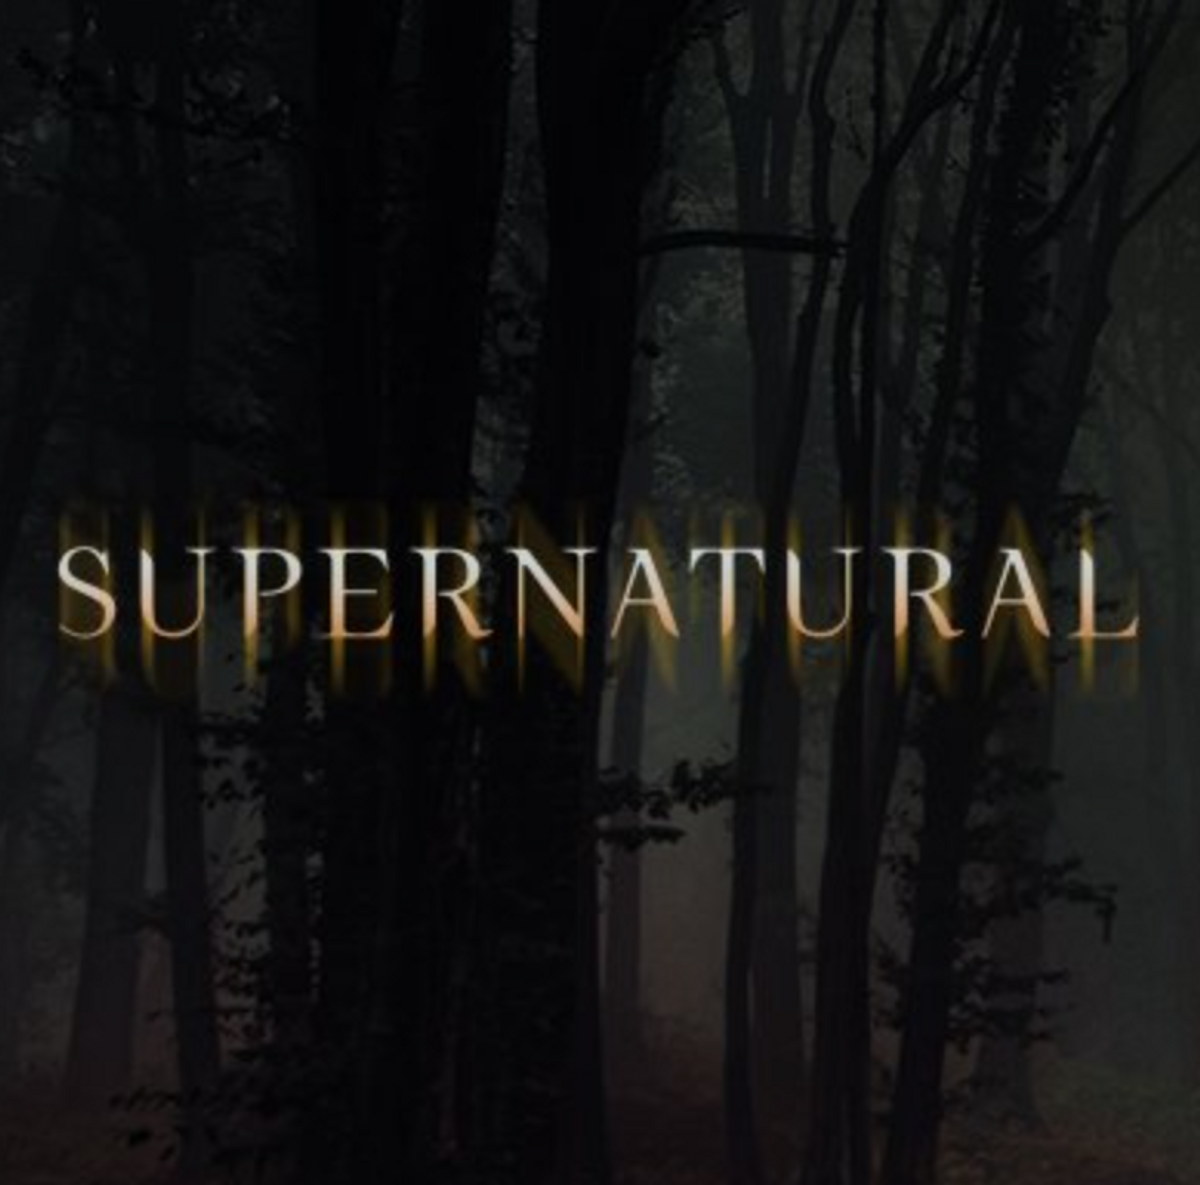 A College Student's Finals' Stress As Told By Supernatural